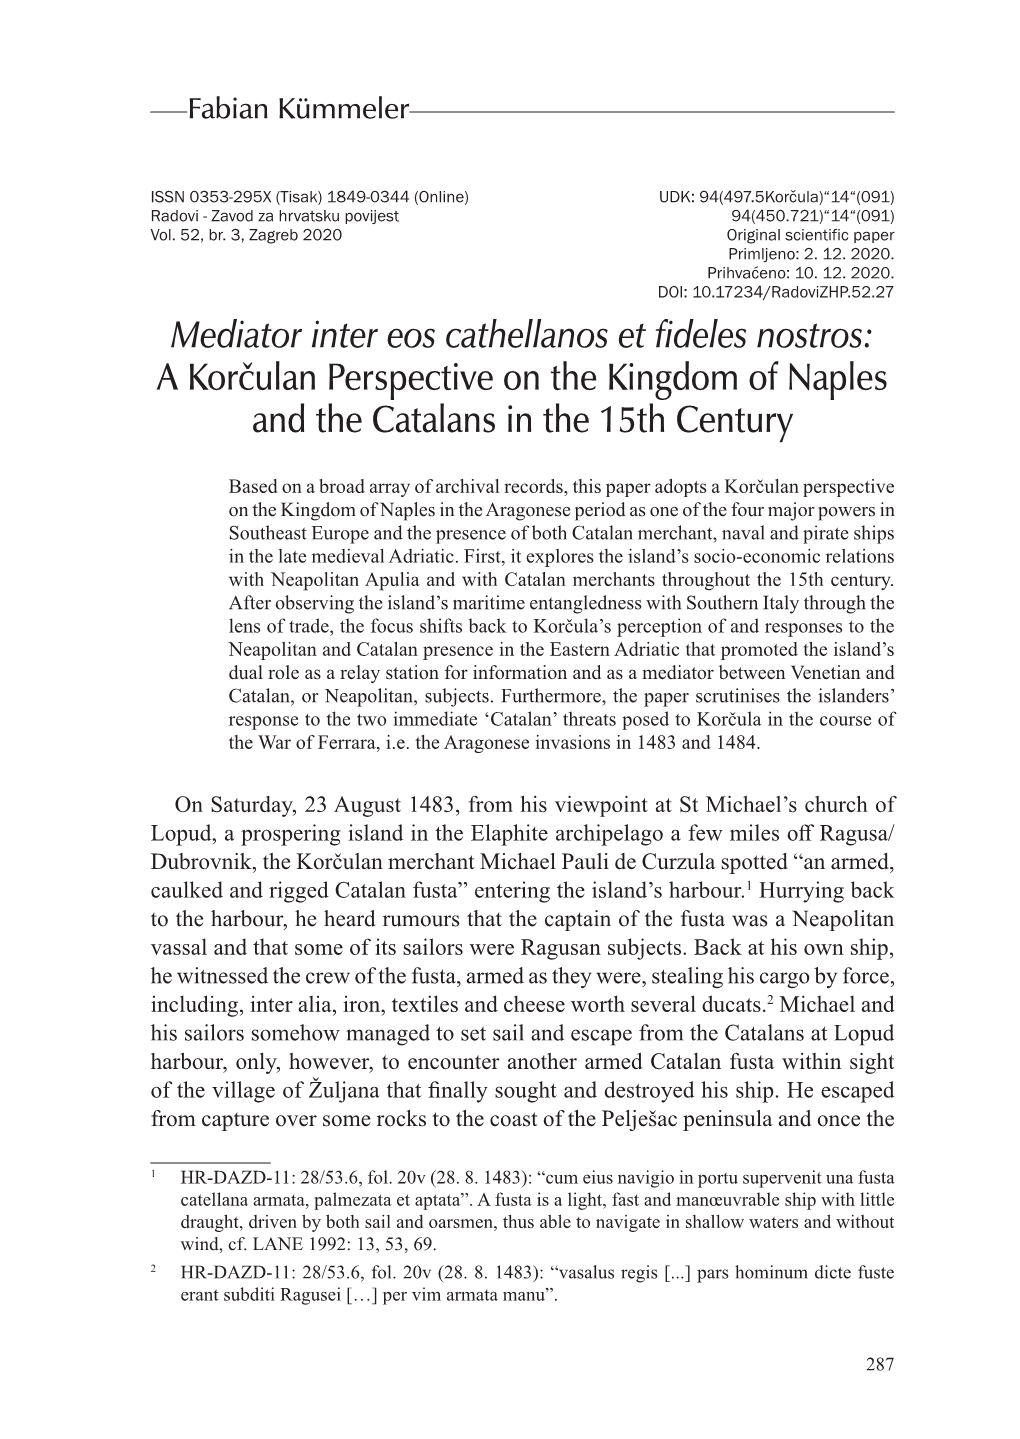 Mediator Inter Eos Cathellanos Et Fideles Nostros: a Korčulan Perspective on the Kingdom of Naples and the Catalans in the 15Th Century